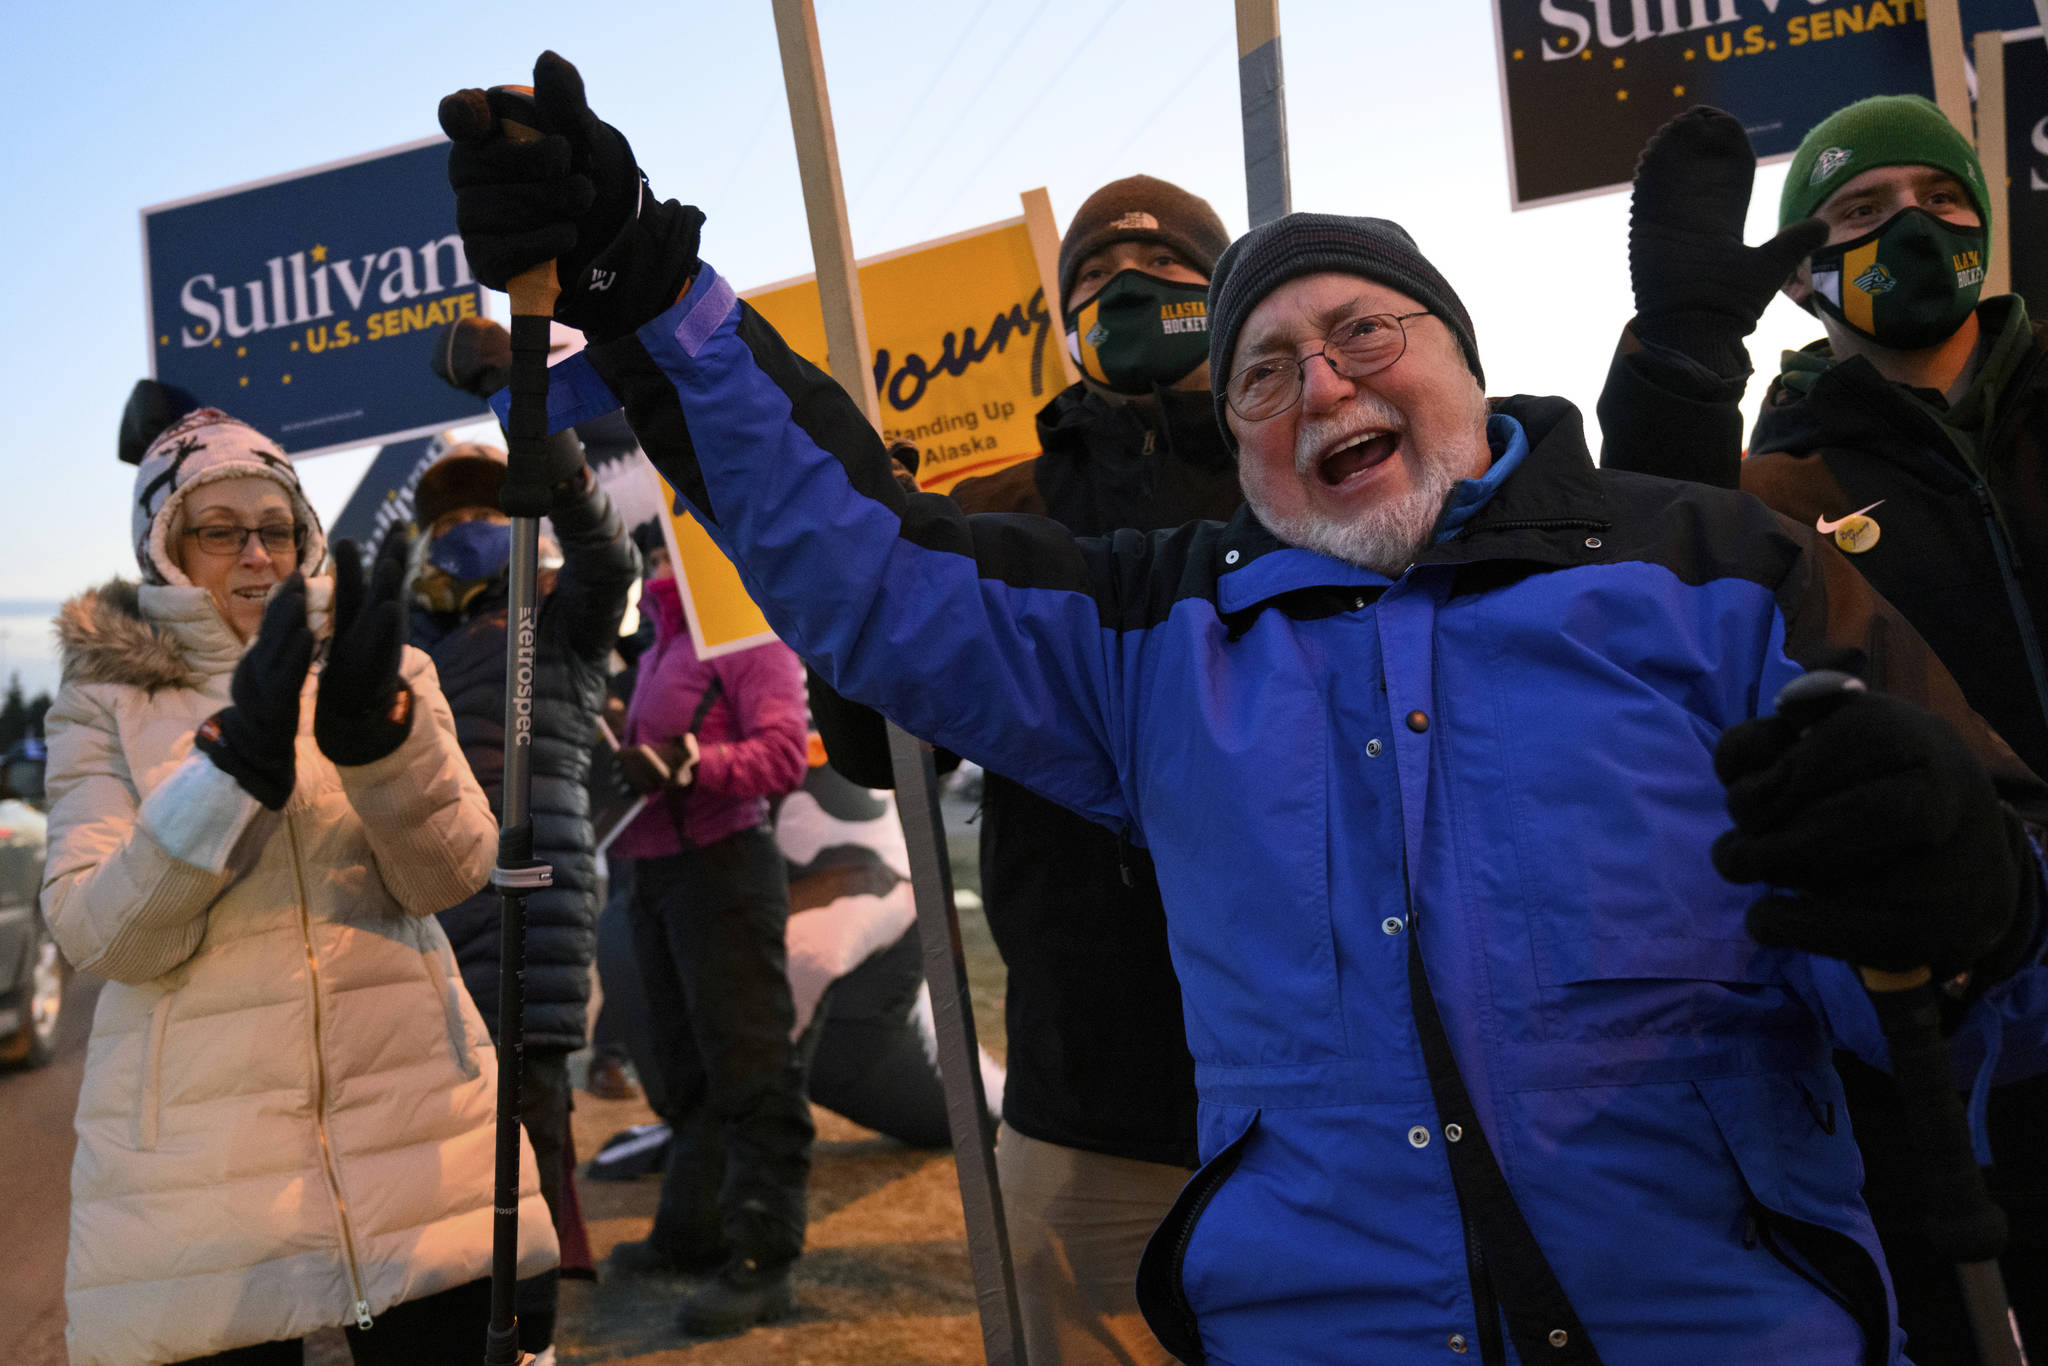 In this Nov. 3, 2020, file photo, Rep. Don Young, R-Alaska, gathers with supporters in Anchorage, Alaska. Young, the longest-serving Republican ever in the U.S. House, has won his 25th term. Young defeated Alyse Galvin in back-to-back elections for Alaska’s sole seat in the House. The race was called Wednesday, Nov. 11. (Marc Lester/Anchorage Daily News via AP, File)